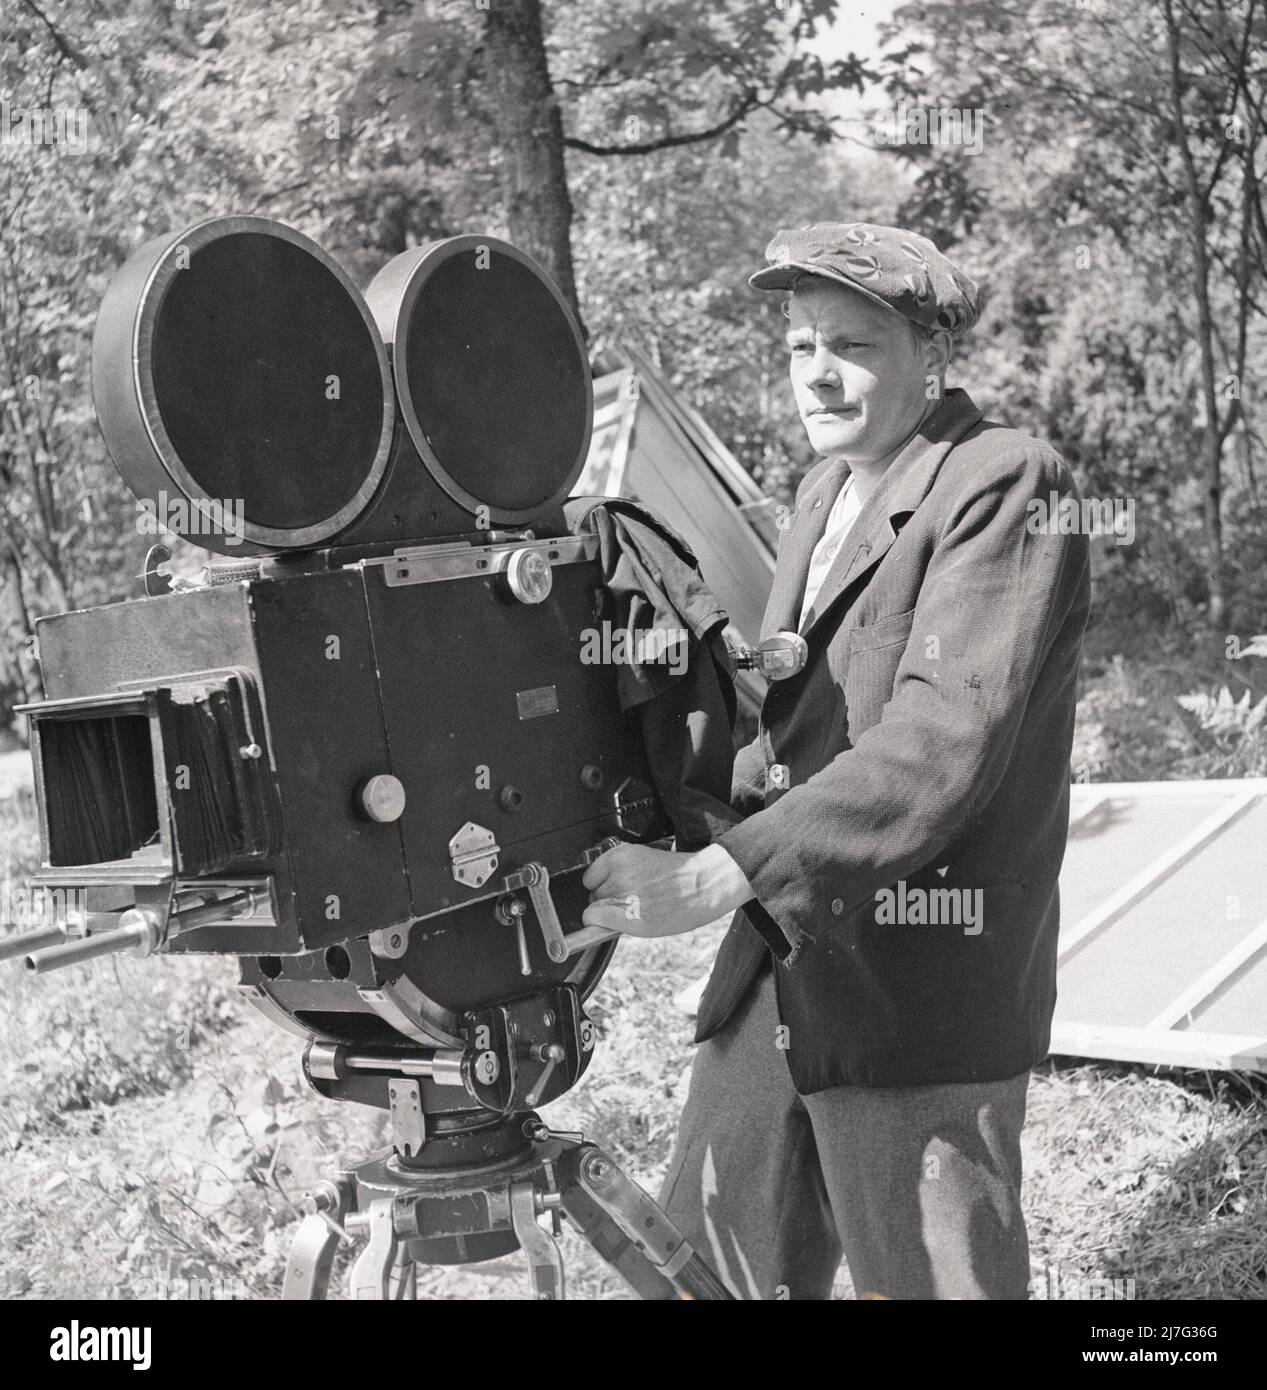 Filming in the 1940s. Filmdirector and actor Hampe Faustman, 1919-1961 on a filmset 1946 beside the filmcamera. Sweden 1953 ref U125-4 Stock Photo